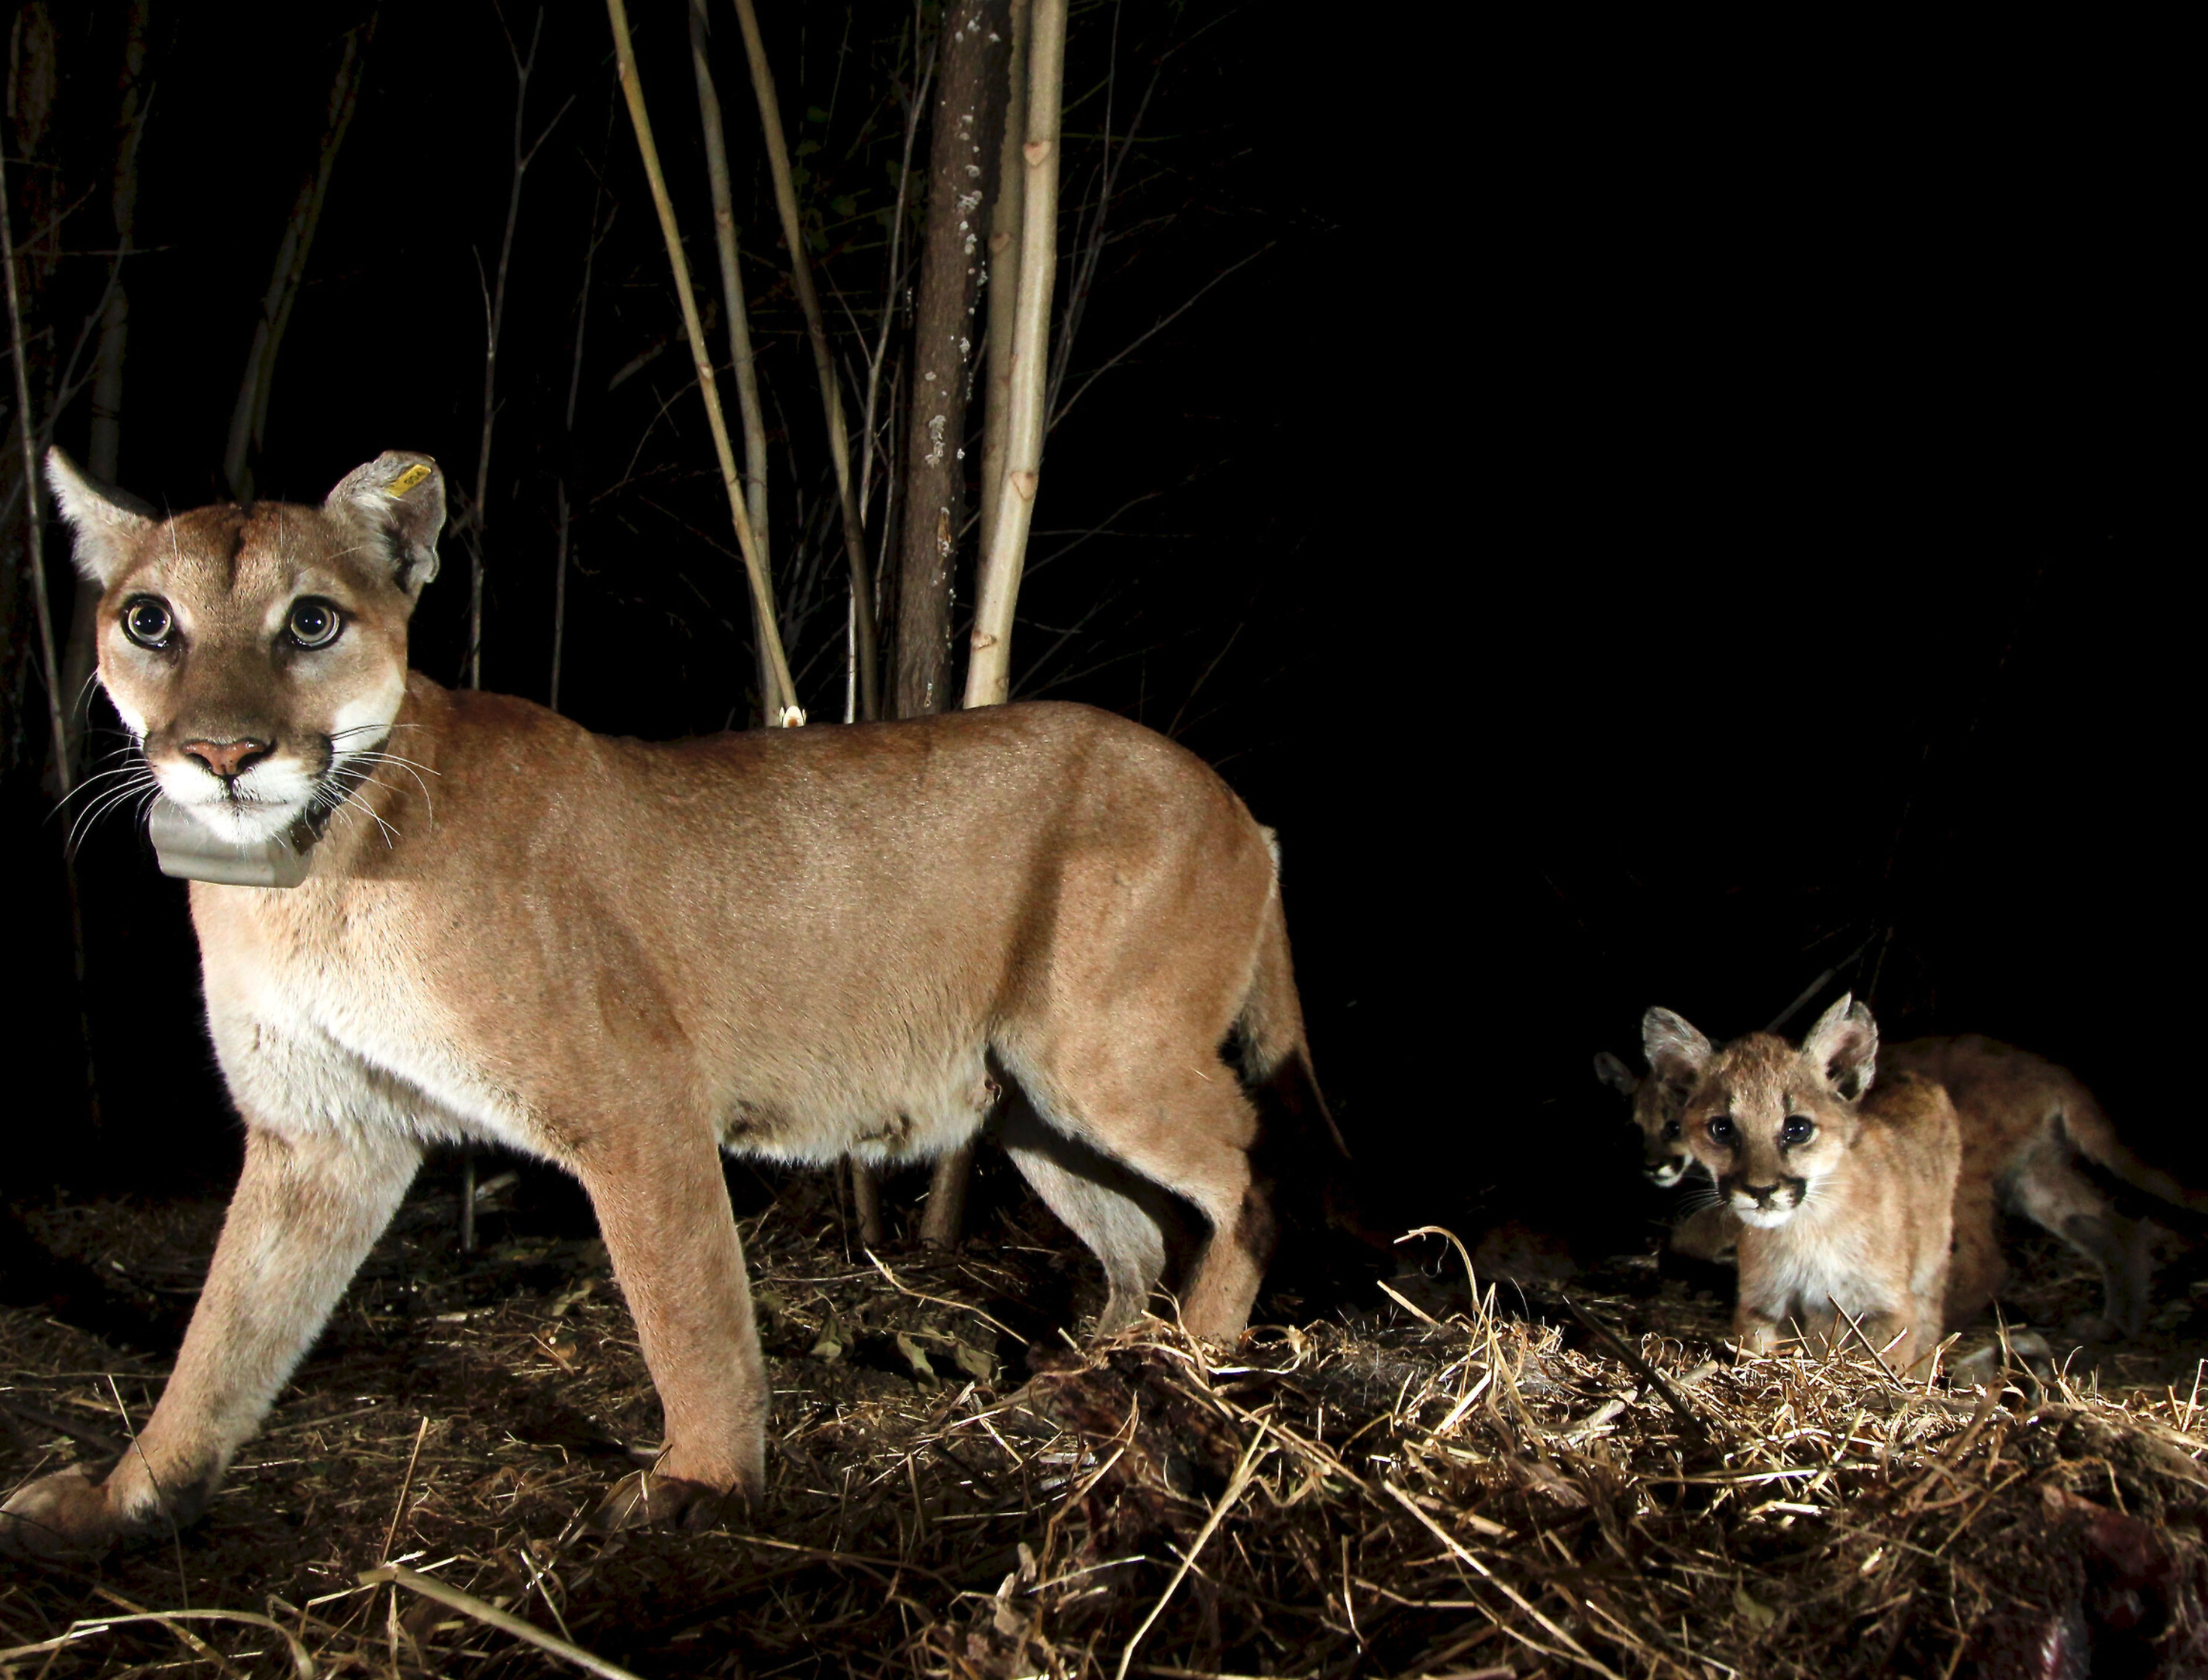 Mountain Lion looking into camera at night with kittens walking behind.